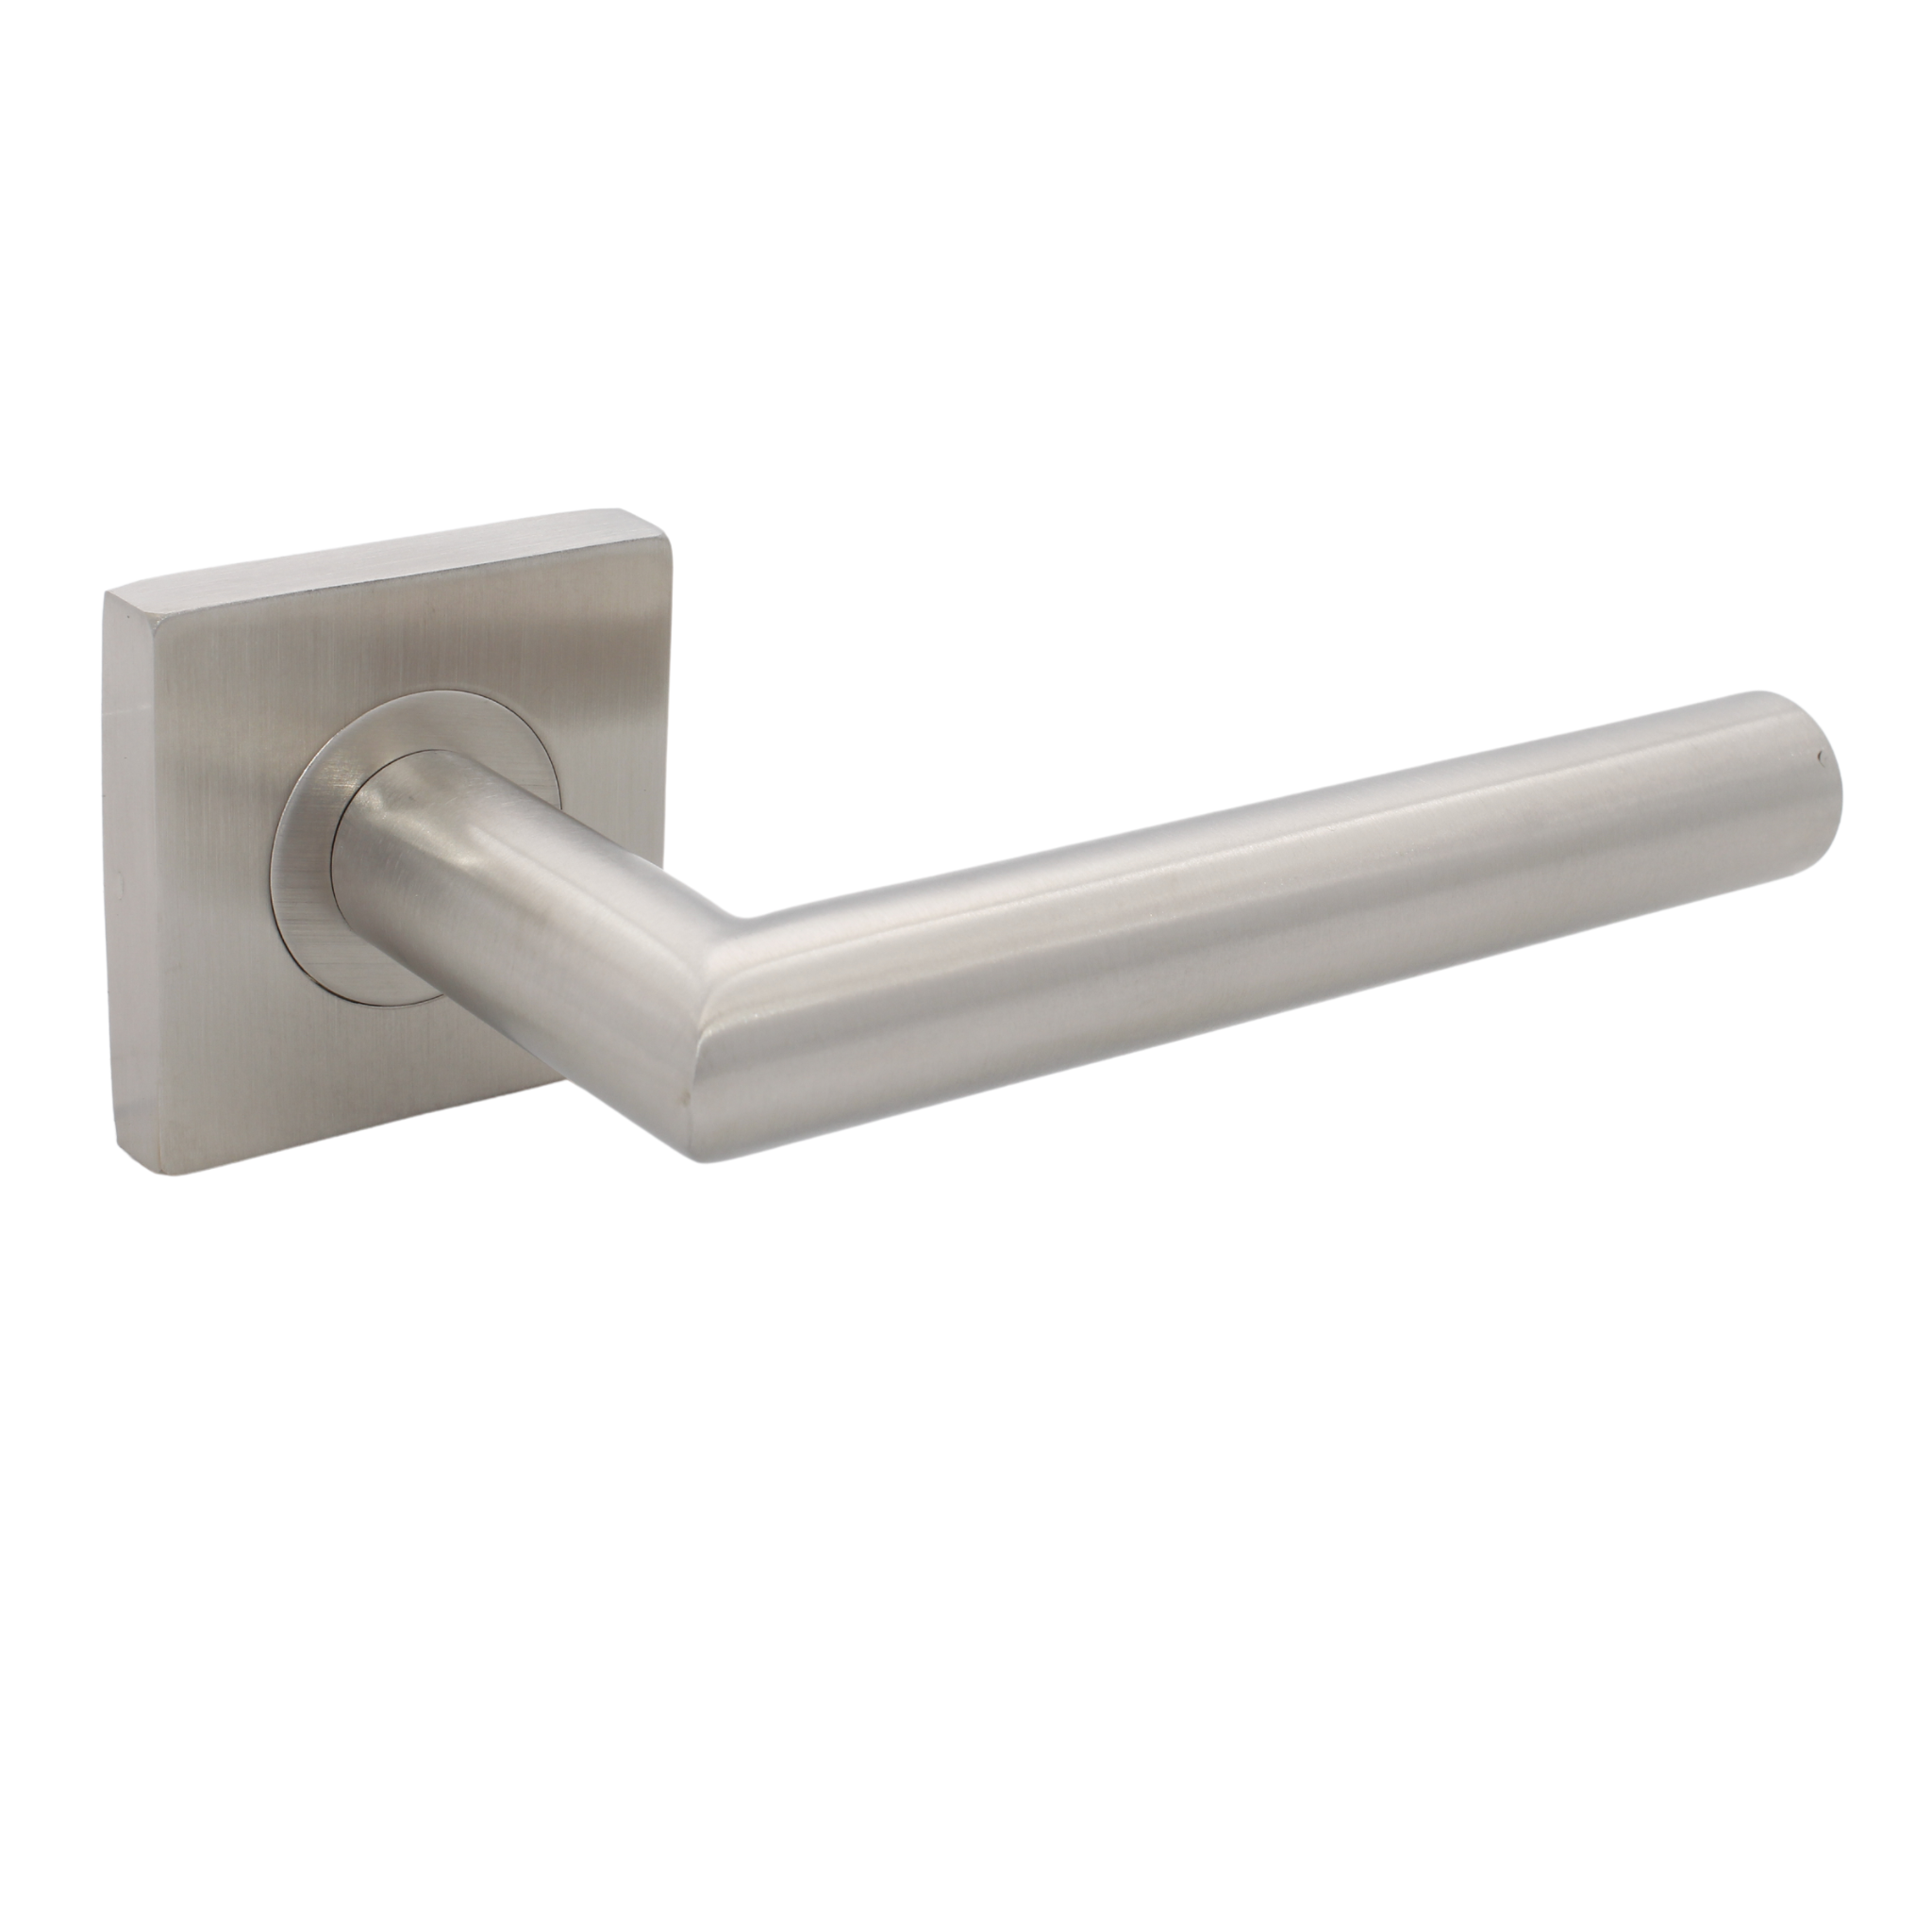 FT02.S._.TR, Lever Handles, Tubular, On Square Rose, With Escutcheons, 134mm (l), Stainless Steel with Tarnish Resistant, CISA